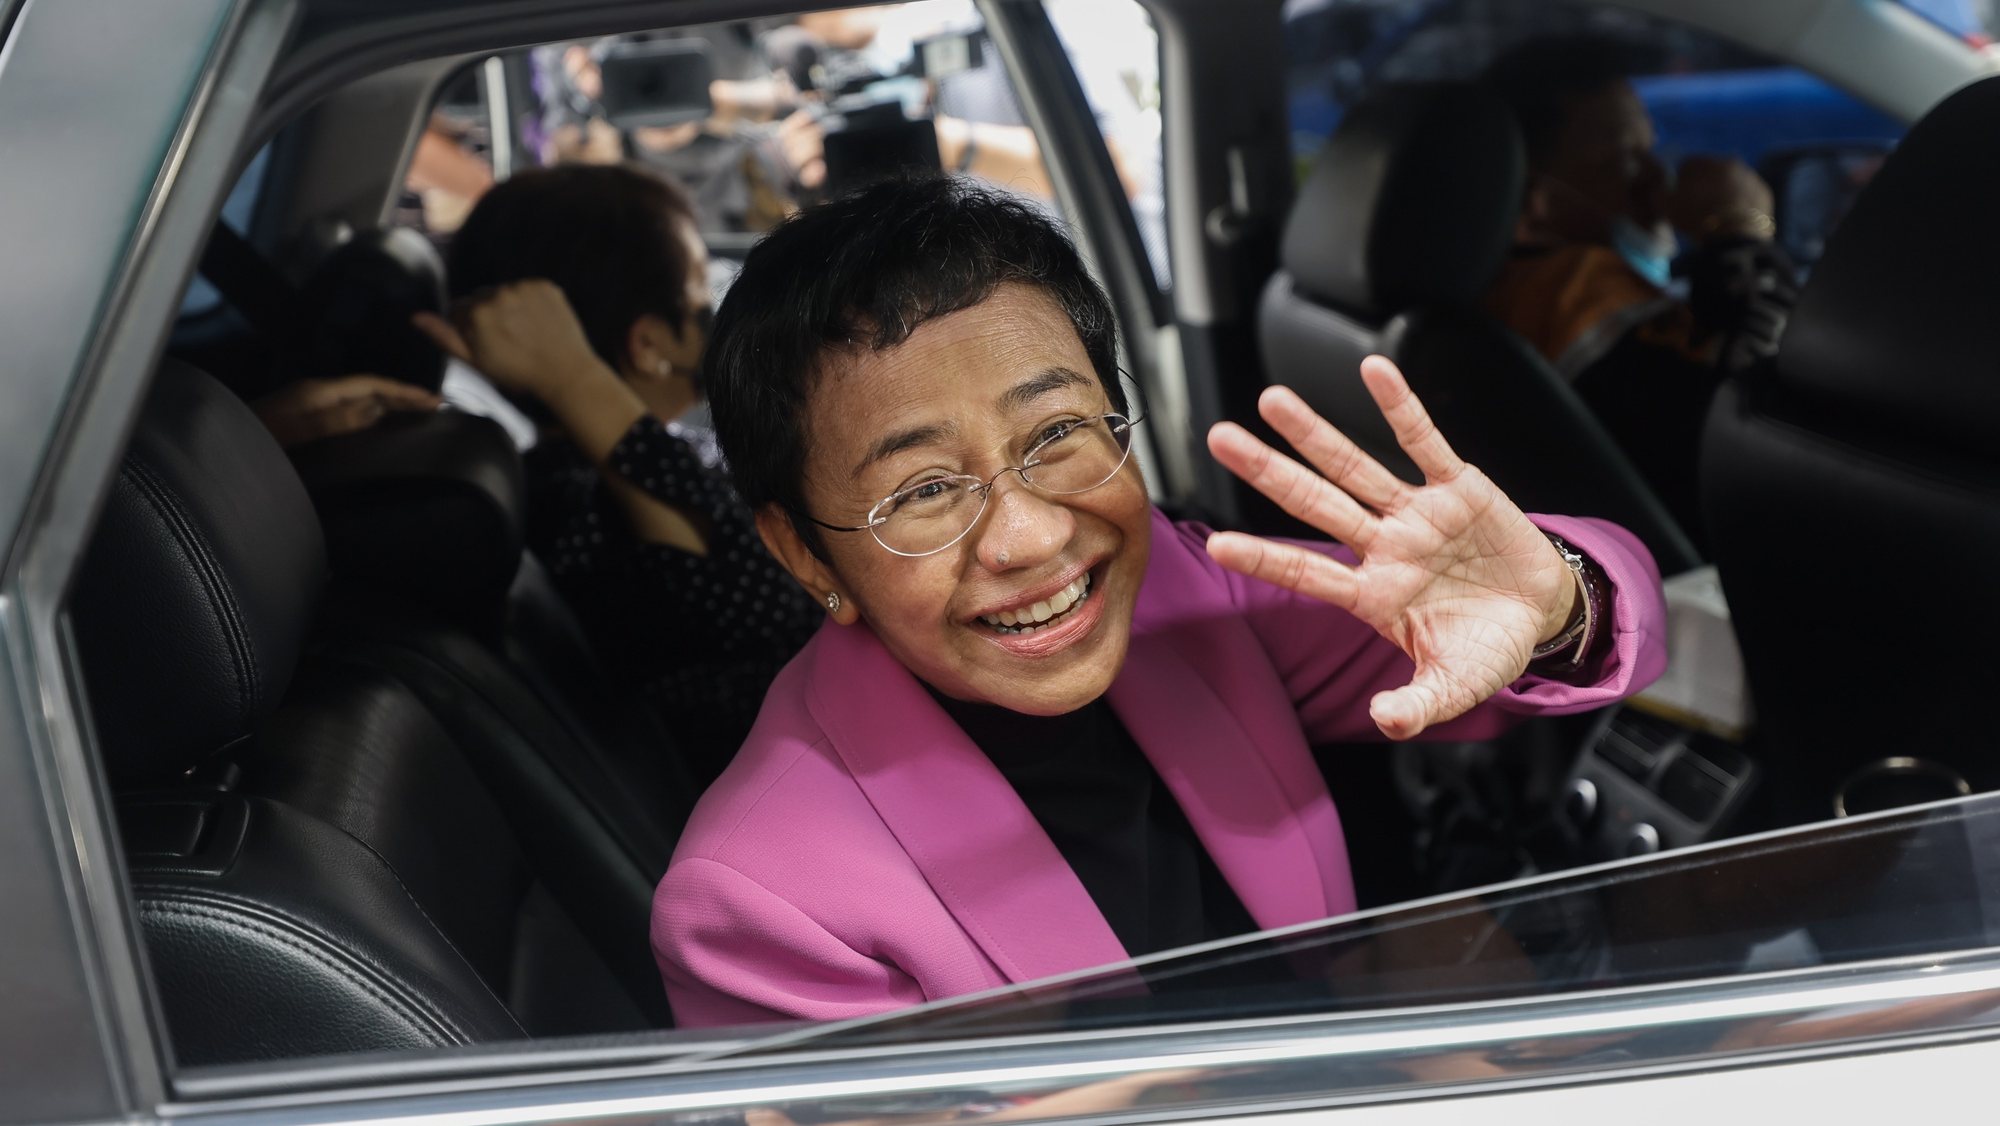 epa10412085 Nobel Peace Prize laureate Maria Ressa, the CEO of online news site Rappler, waves from a vehicle outside the Court of Tax Appeals in Quezon City, Metro Manila, Philippines, 18 January 2023. The tax court acquitted Ressa and Rappler Holdings Corporation of four tax evasion charges that were filed in 2018 during the term of former Philippine president Rodrigo Duterte.  EPA/ROLEX DELA PENA